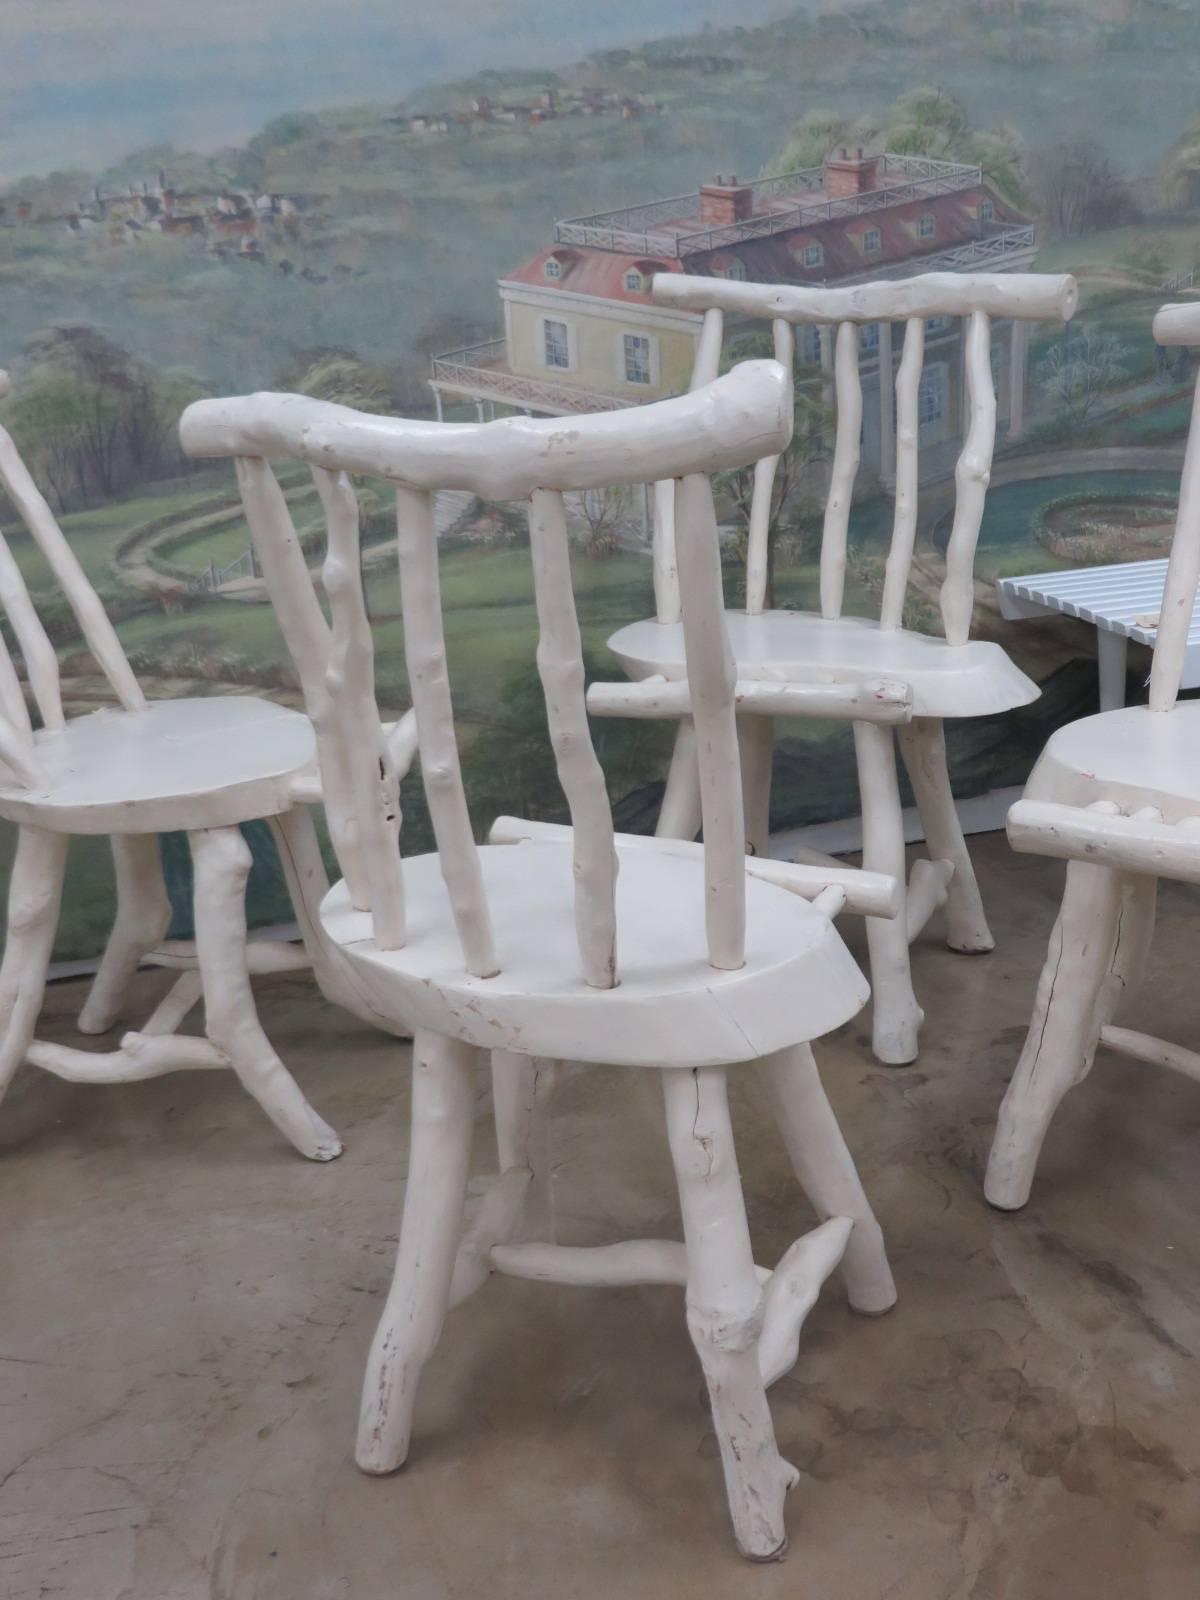 Four Rustic Adirondack Style Chairs In Distressed Condition In Tarrytown, NY